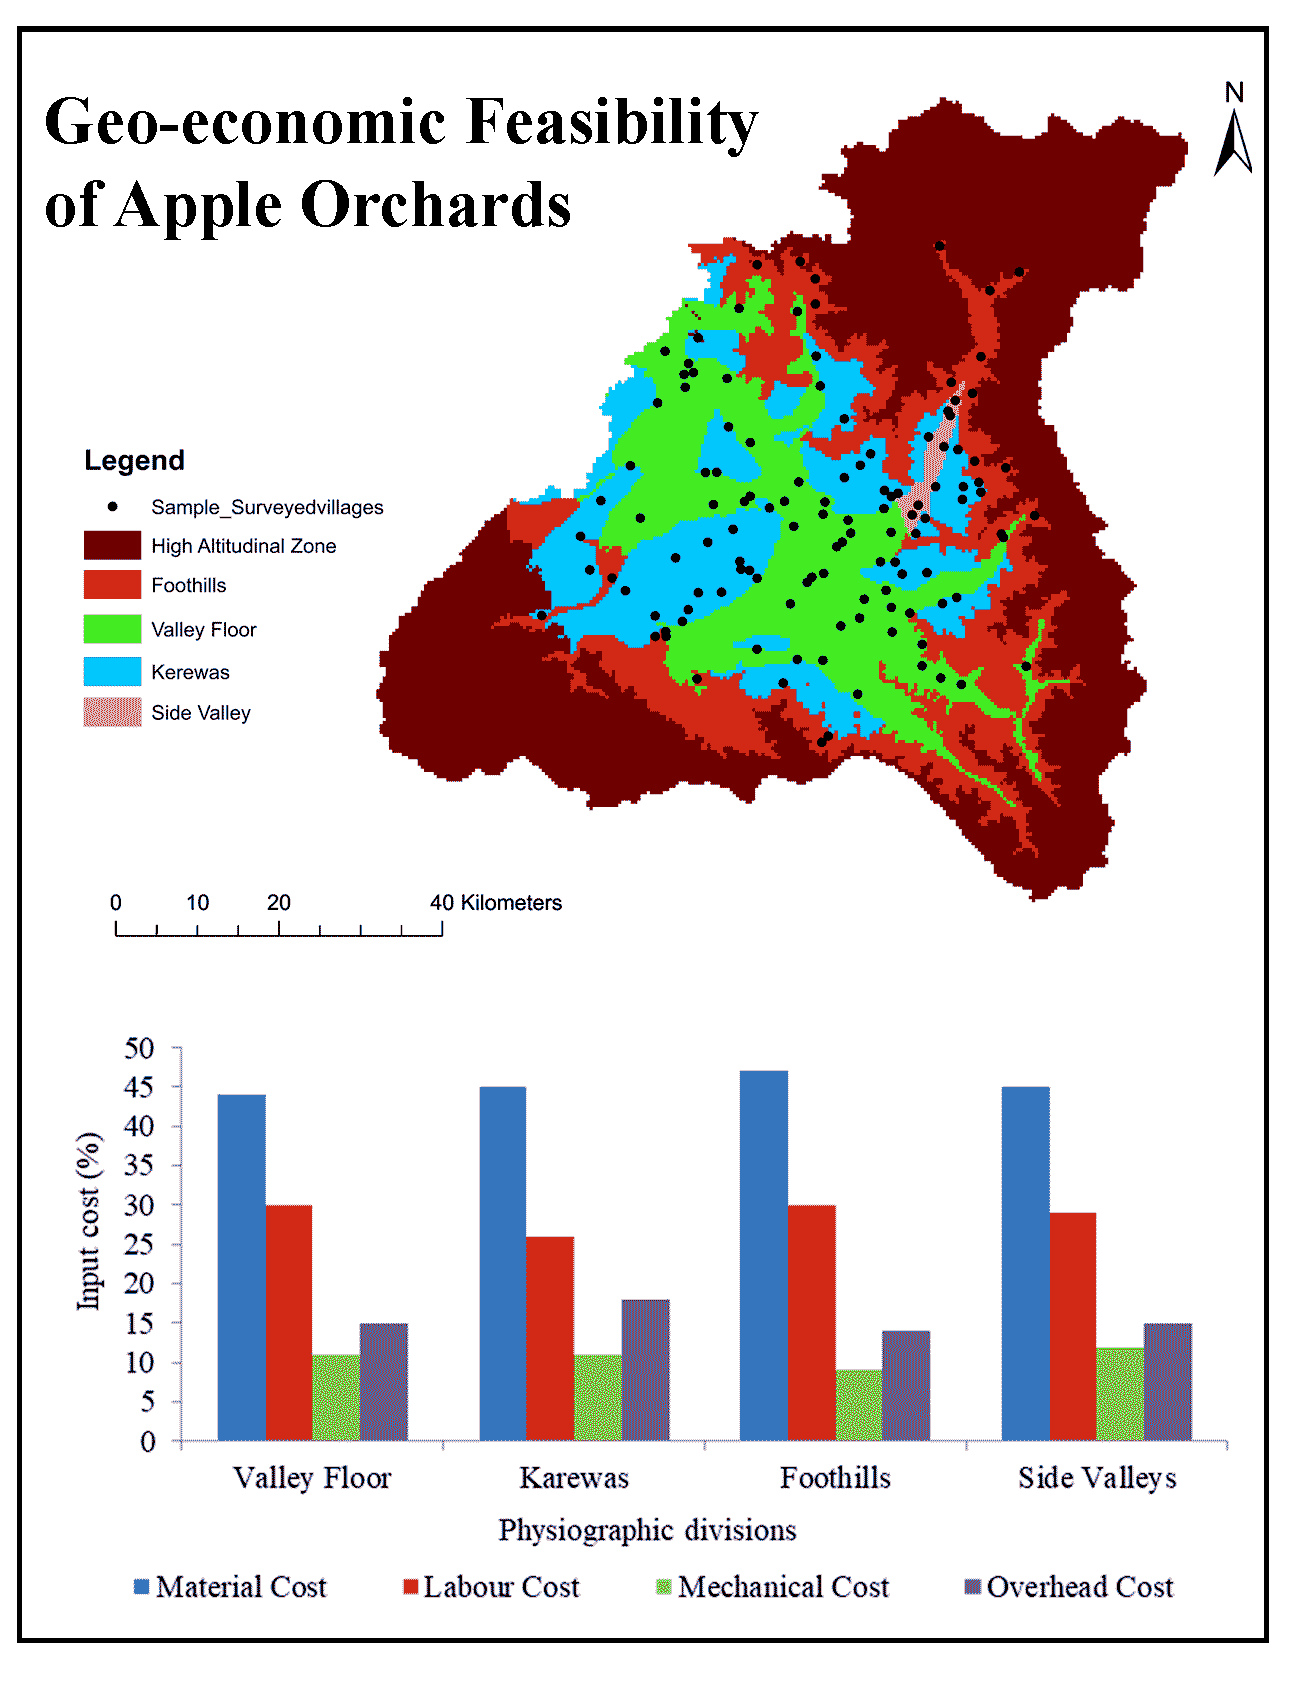 Geo-economic Feasibility of Apple Orchards Across Physiographic Divisions in Kashmir Valley, India 